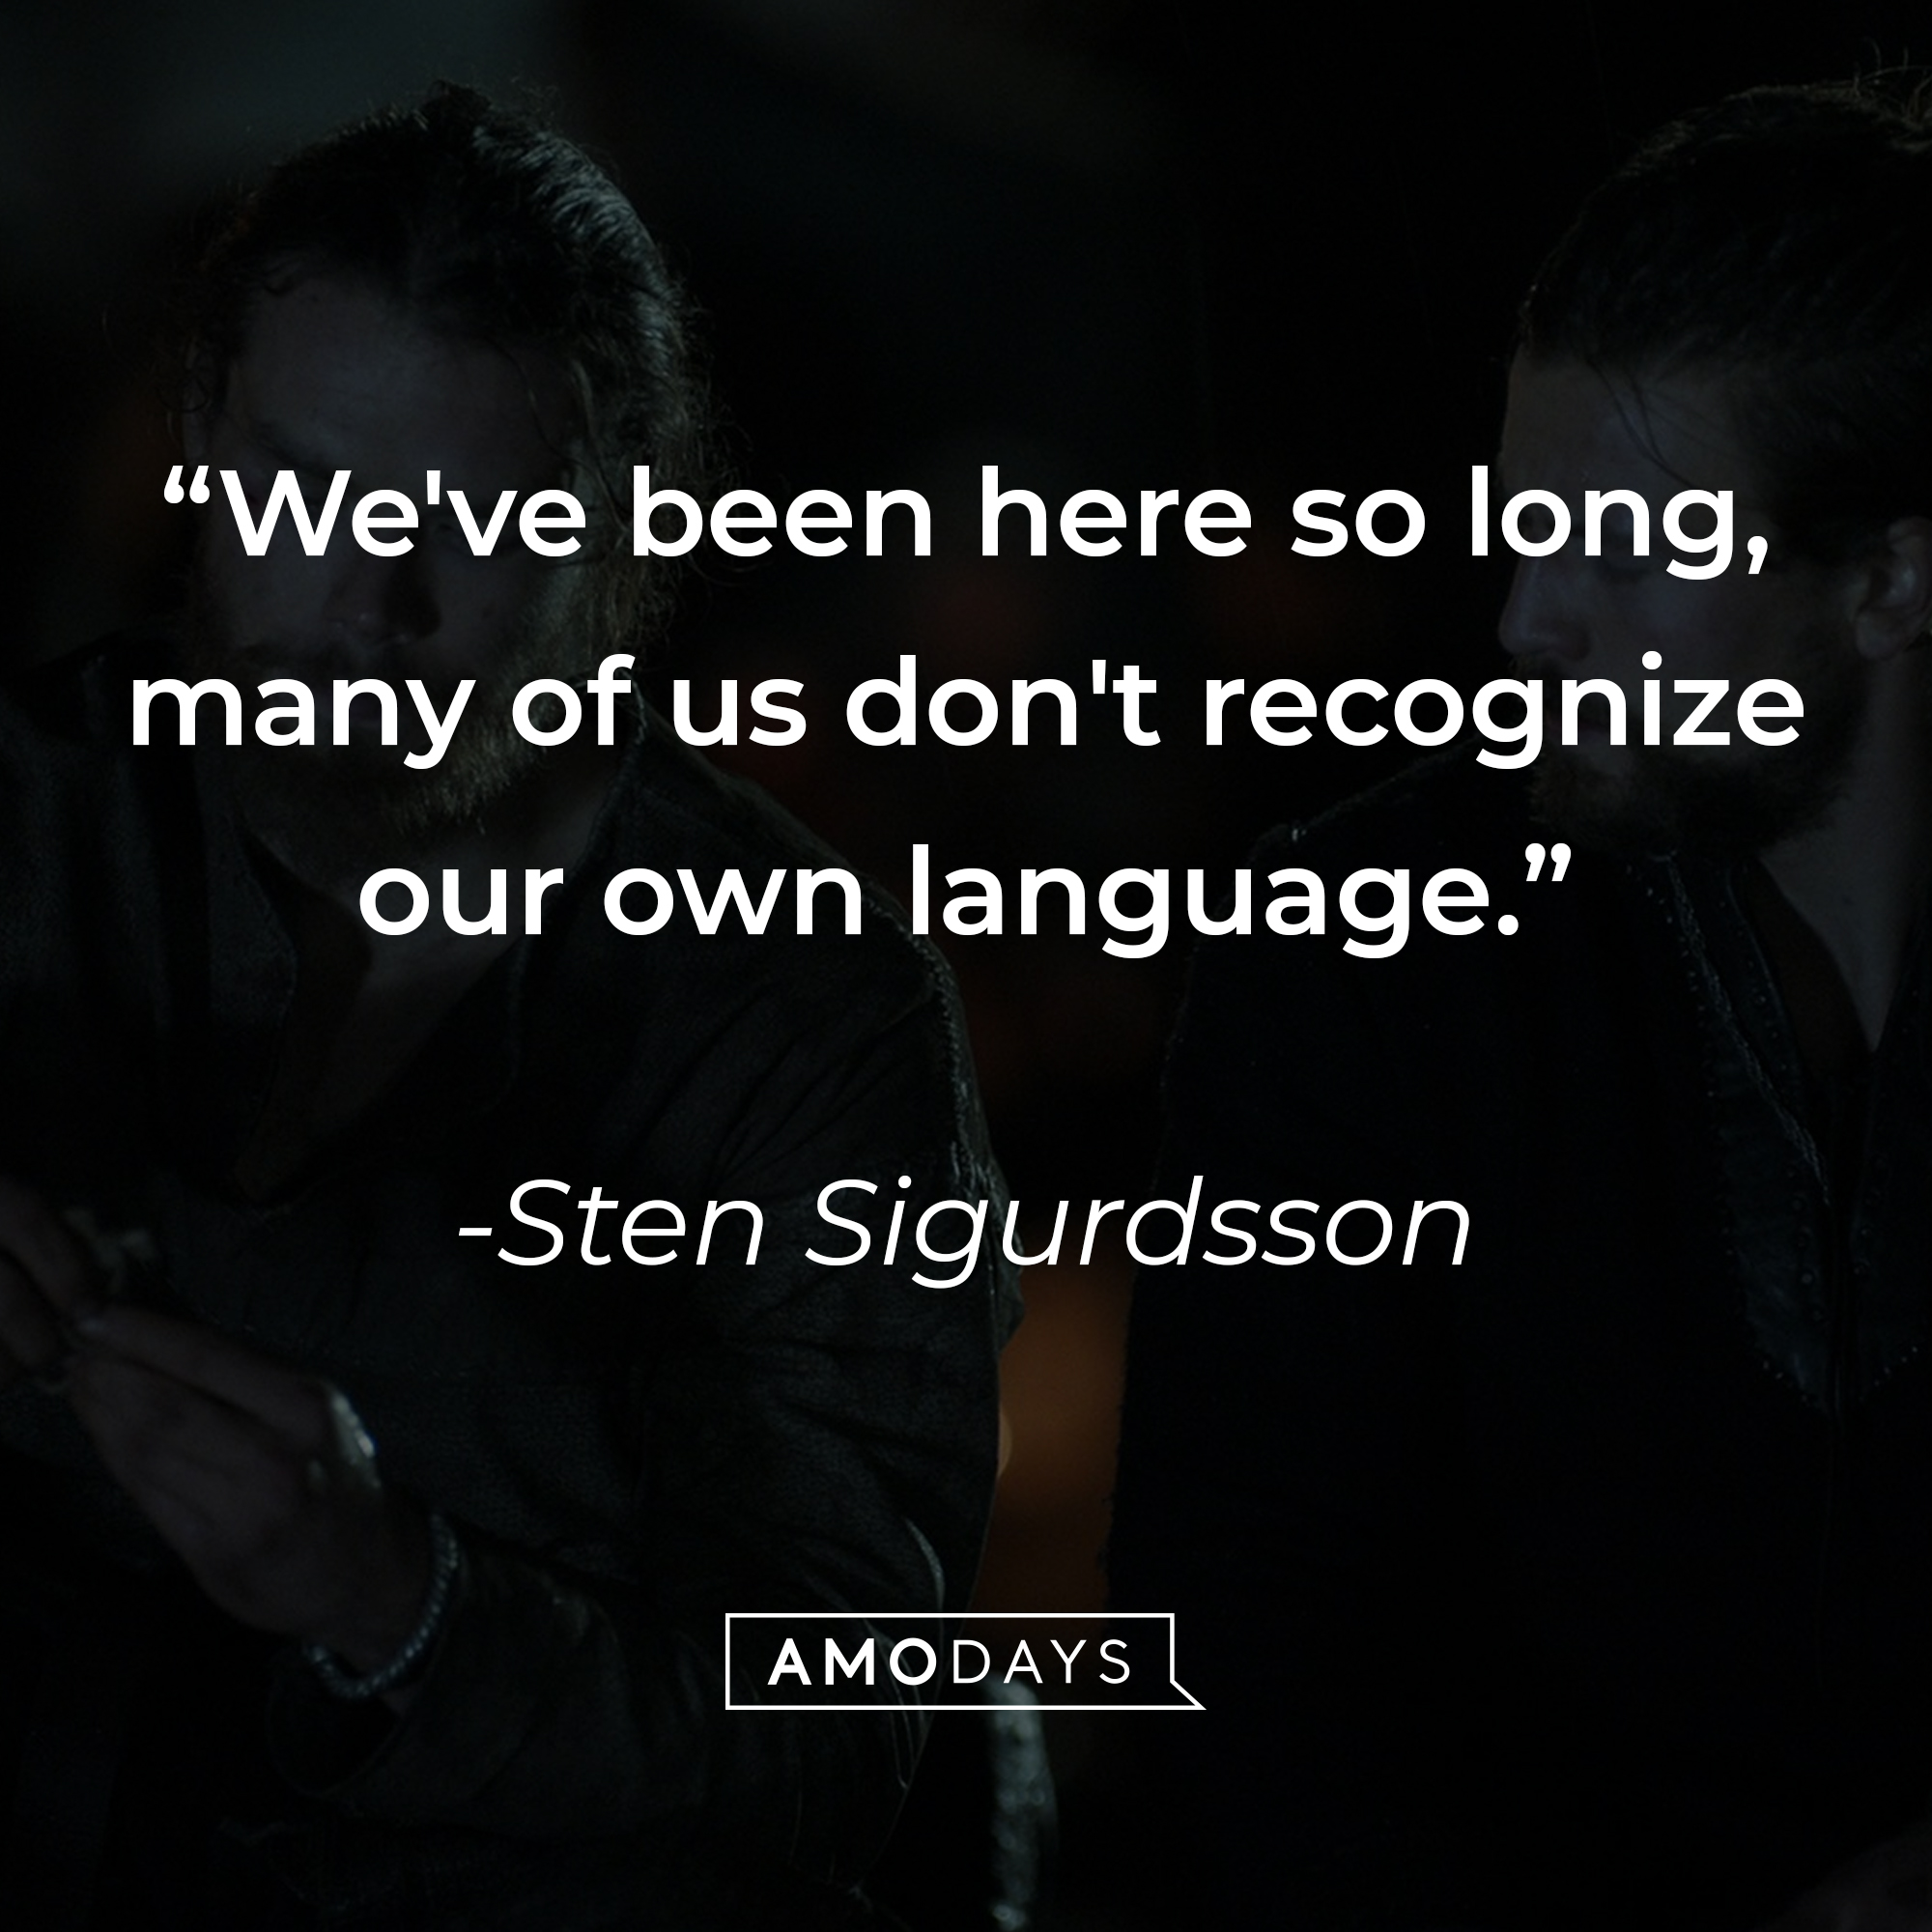 Sten Sigurdsson's quote: "We've been here so long many of us don't recognize our own language."┃Source: facebook.com/netflixvalhalla